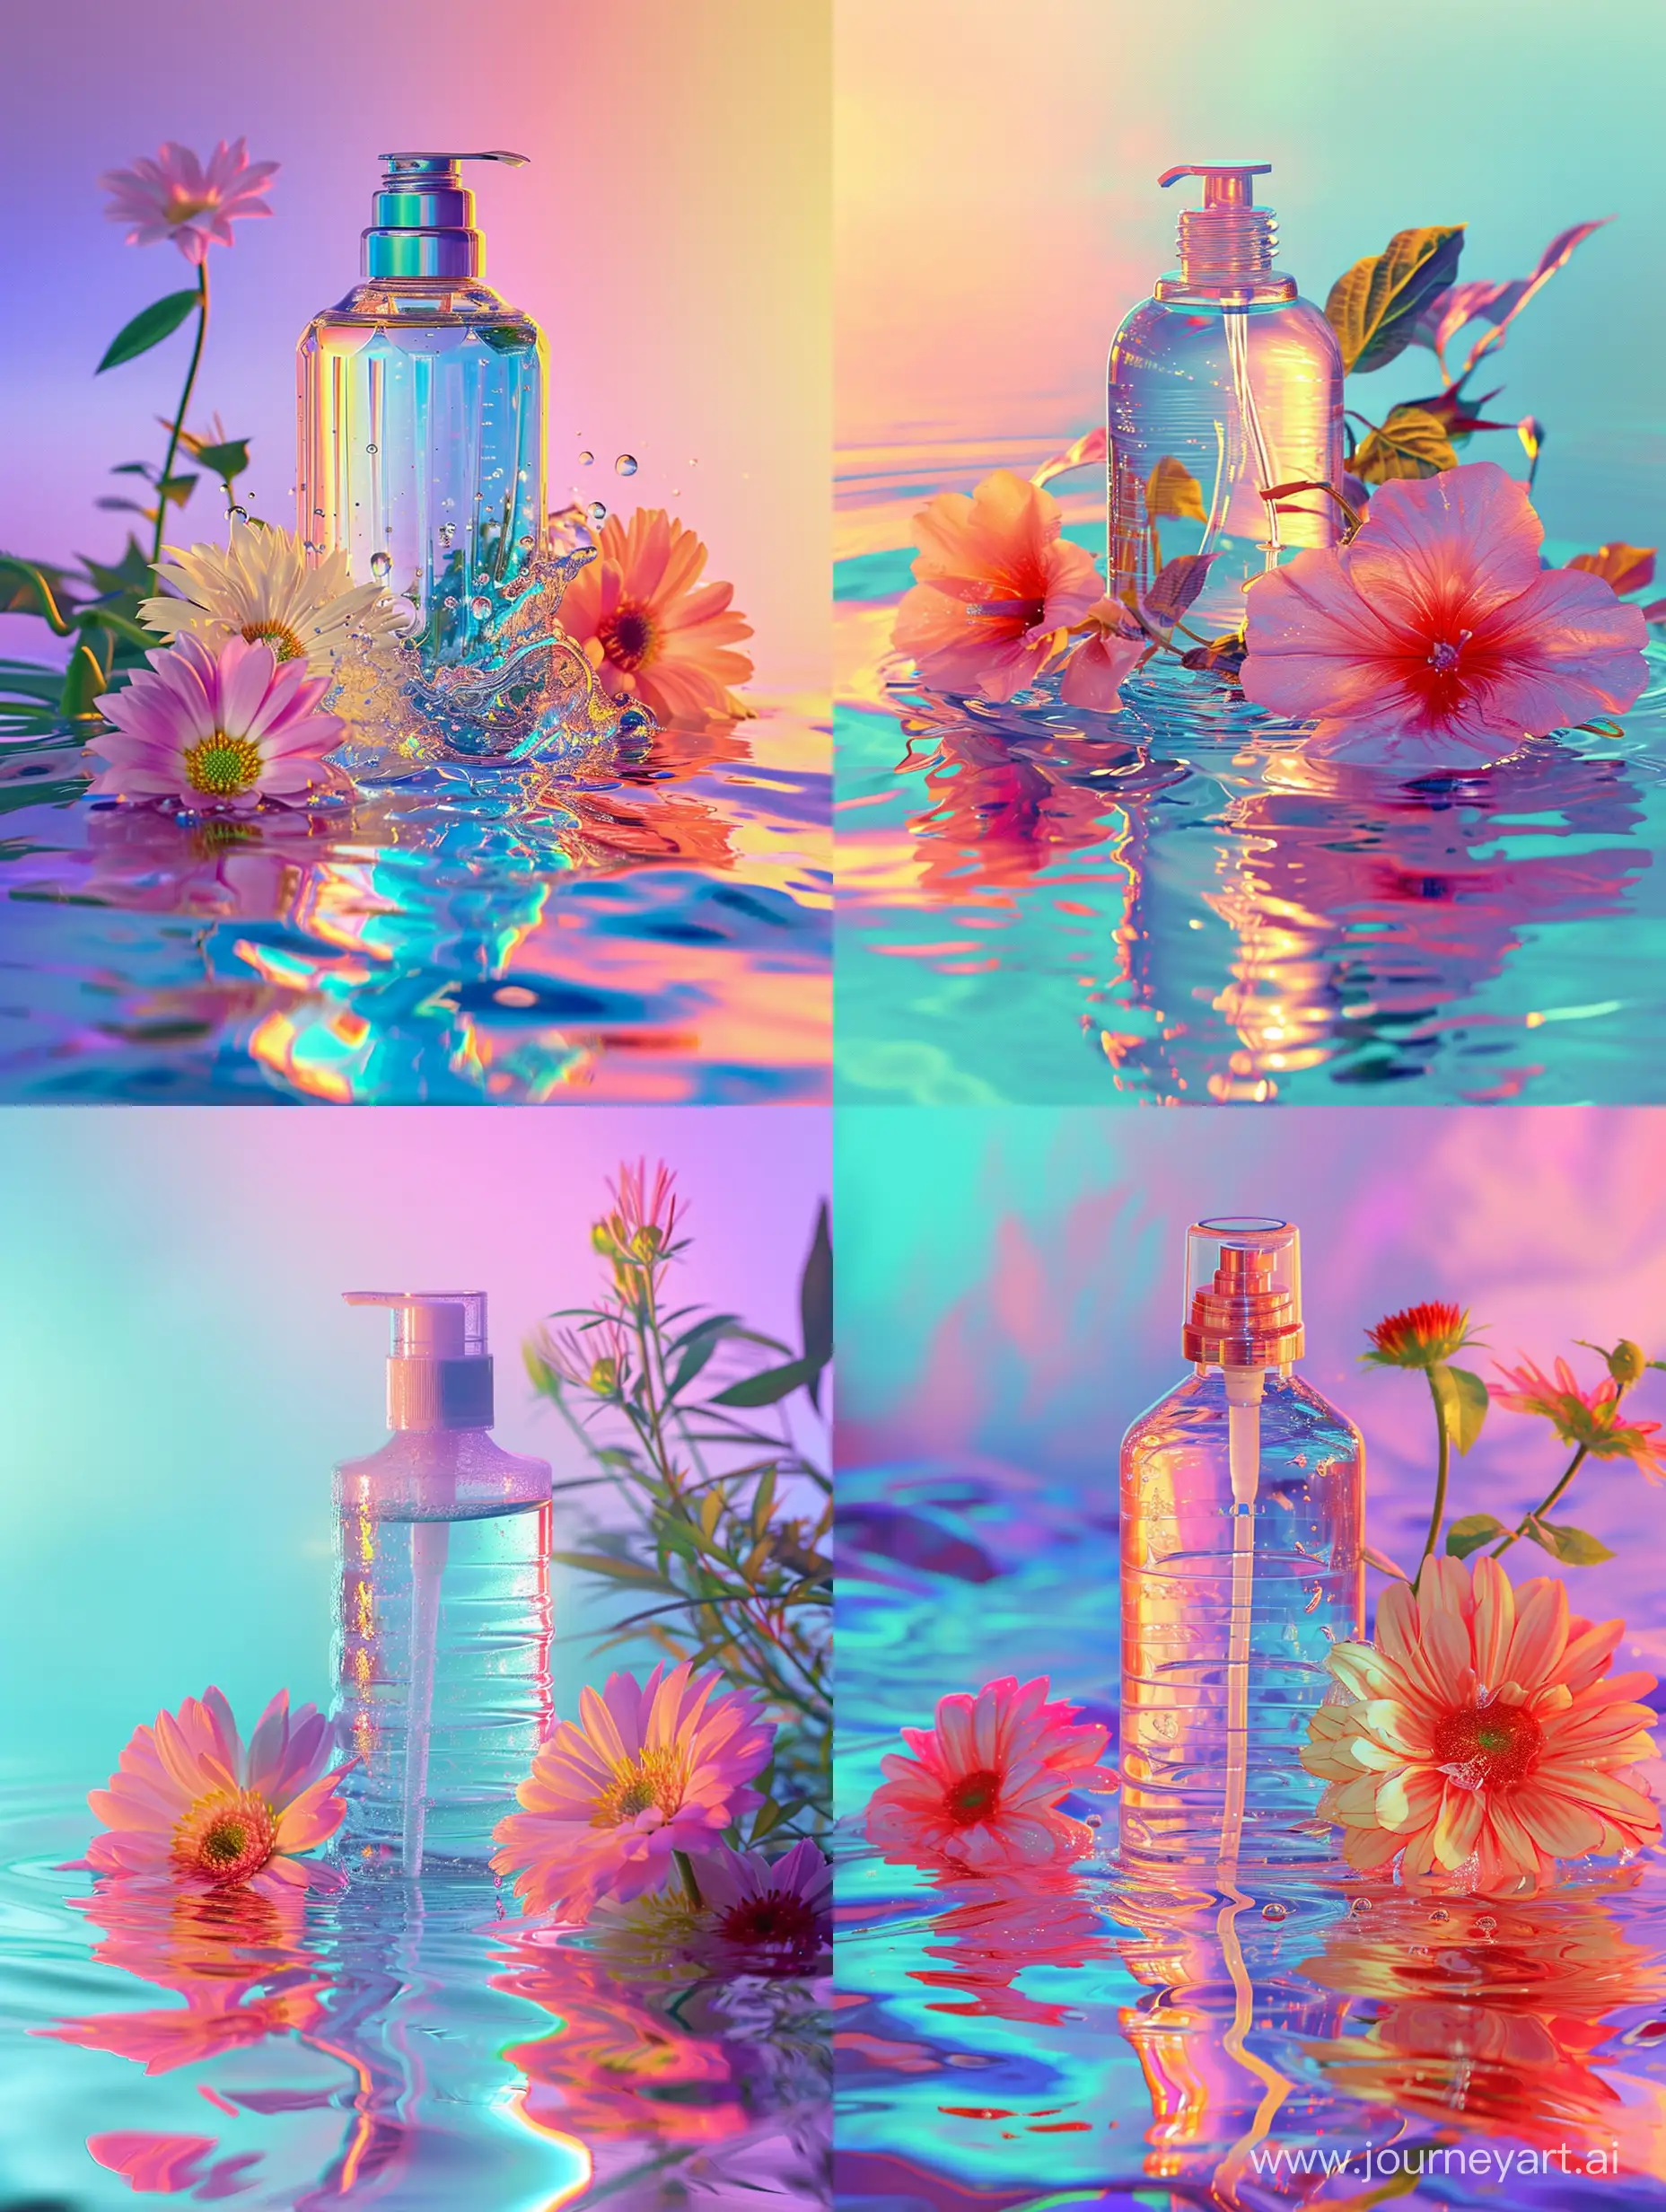 The shampoo bottle is surrounded by water and colors, and the background consists of a gradient. The water plays with its transparent shades, allowing you to see the bottle and the reflections of the flowers in it. The flowers next to the bottle add bright and juicy shades to the overall composition. The gradient background can be of any color, where one shade flows smoothly into another, creating a nice and smooth transition between colors. All together it creates a beautiful and calming picture around the shampoo bottle.